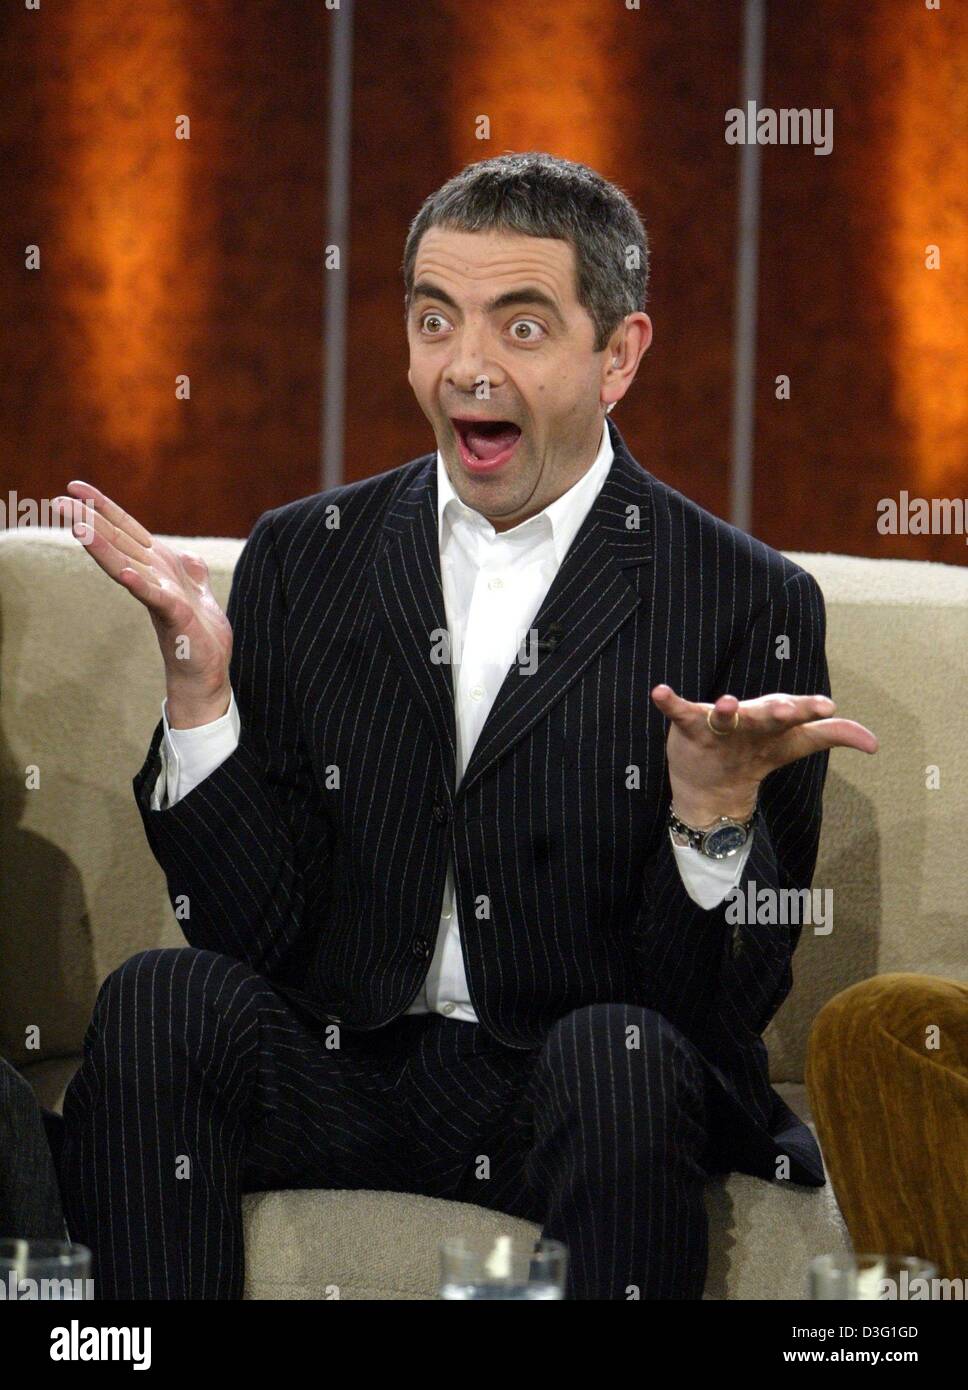 (dpa) - British comedian Rowan Atkinson alias 'Mr Bean' pulls a face during the popular TV show 'Wetten dass...?' (bet that...?), in Lucerne, Switzerland, 22 March 2003. The live show broadcast by the German TV station ZDF was watched by 13.8 million people, although it was subject to be cancelled at the last minute due to the war in Iraq. Stock Photo